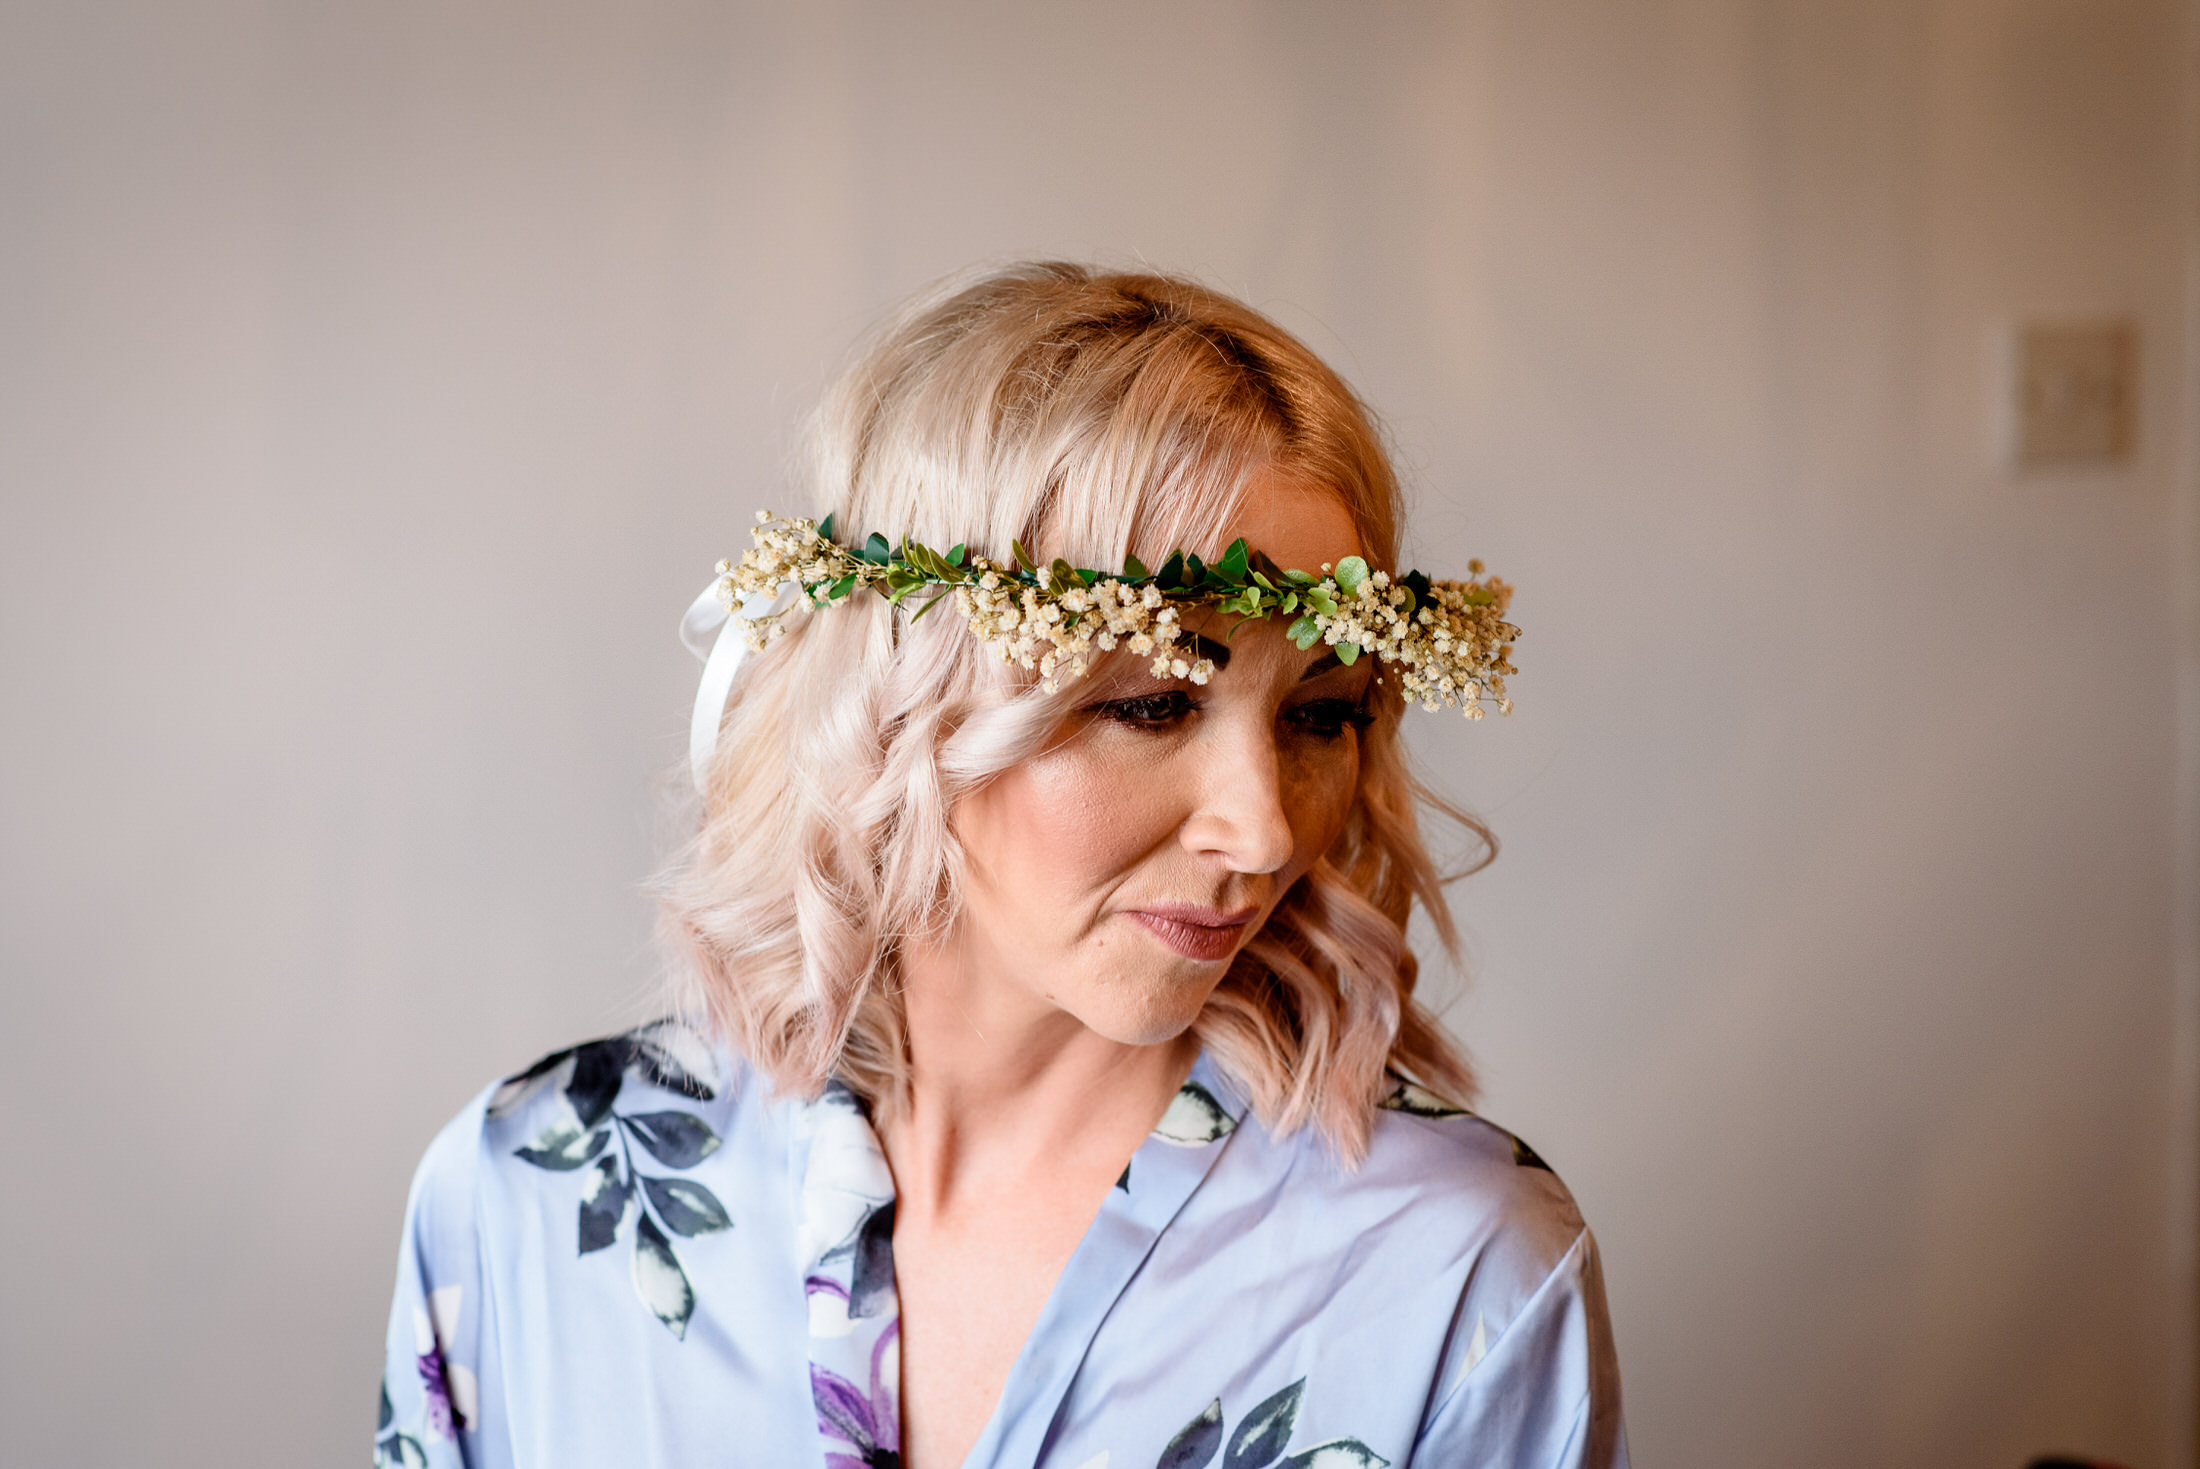 A woman wearing a floral crown at a wedding in front of a mirror.